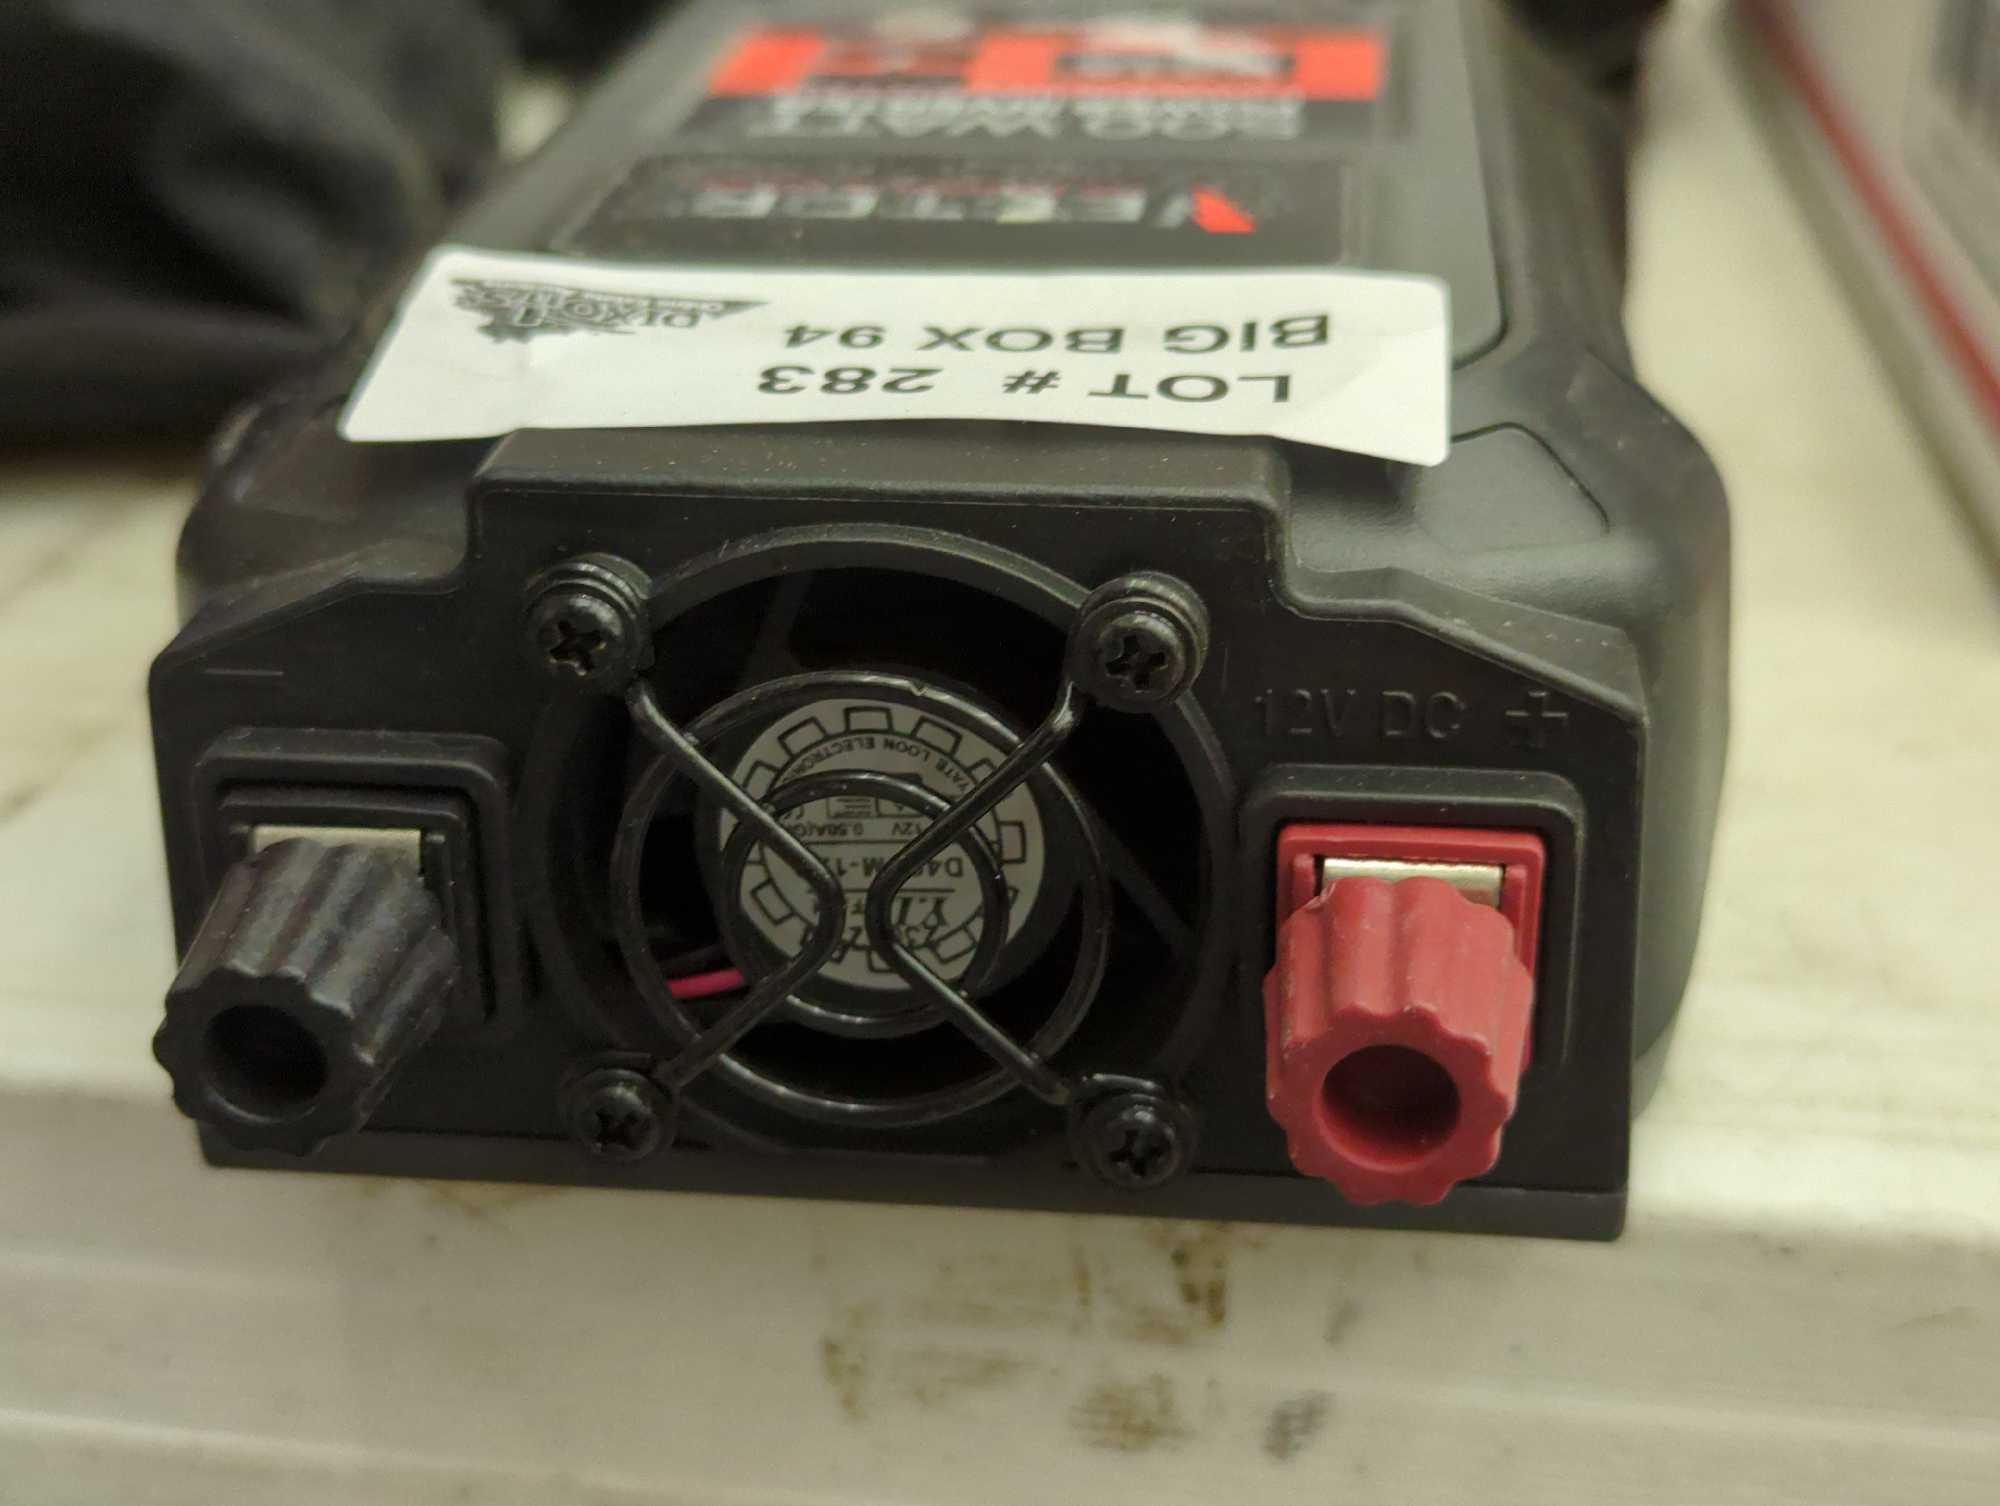 VECTOR 500 Watt Power Inverter, Dual Power Inverter, Two USB Charging Ports, Appears to be New Out